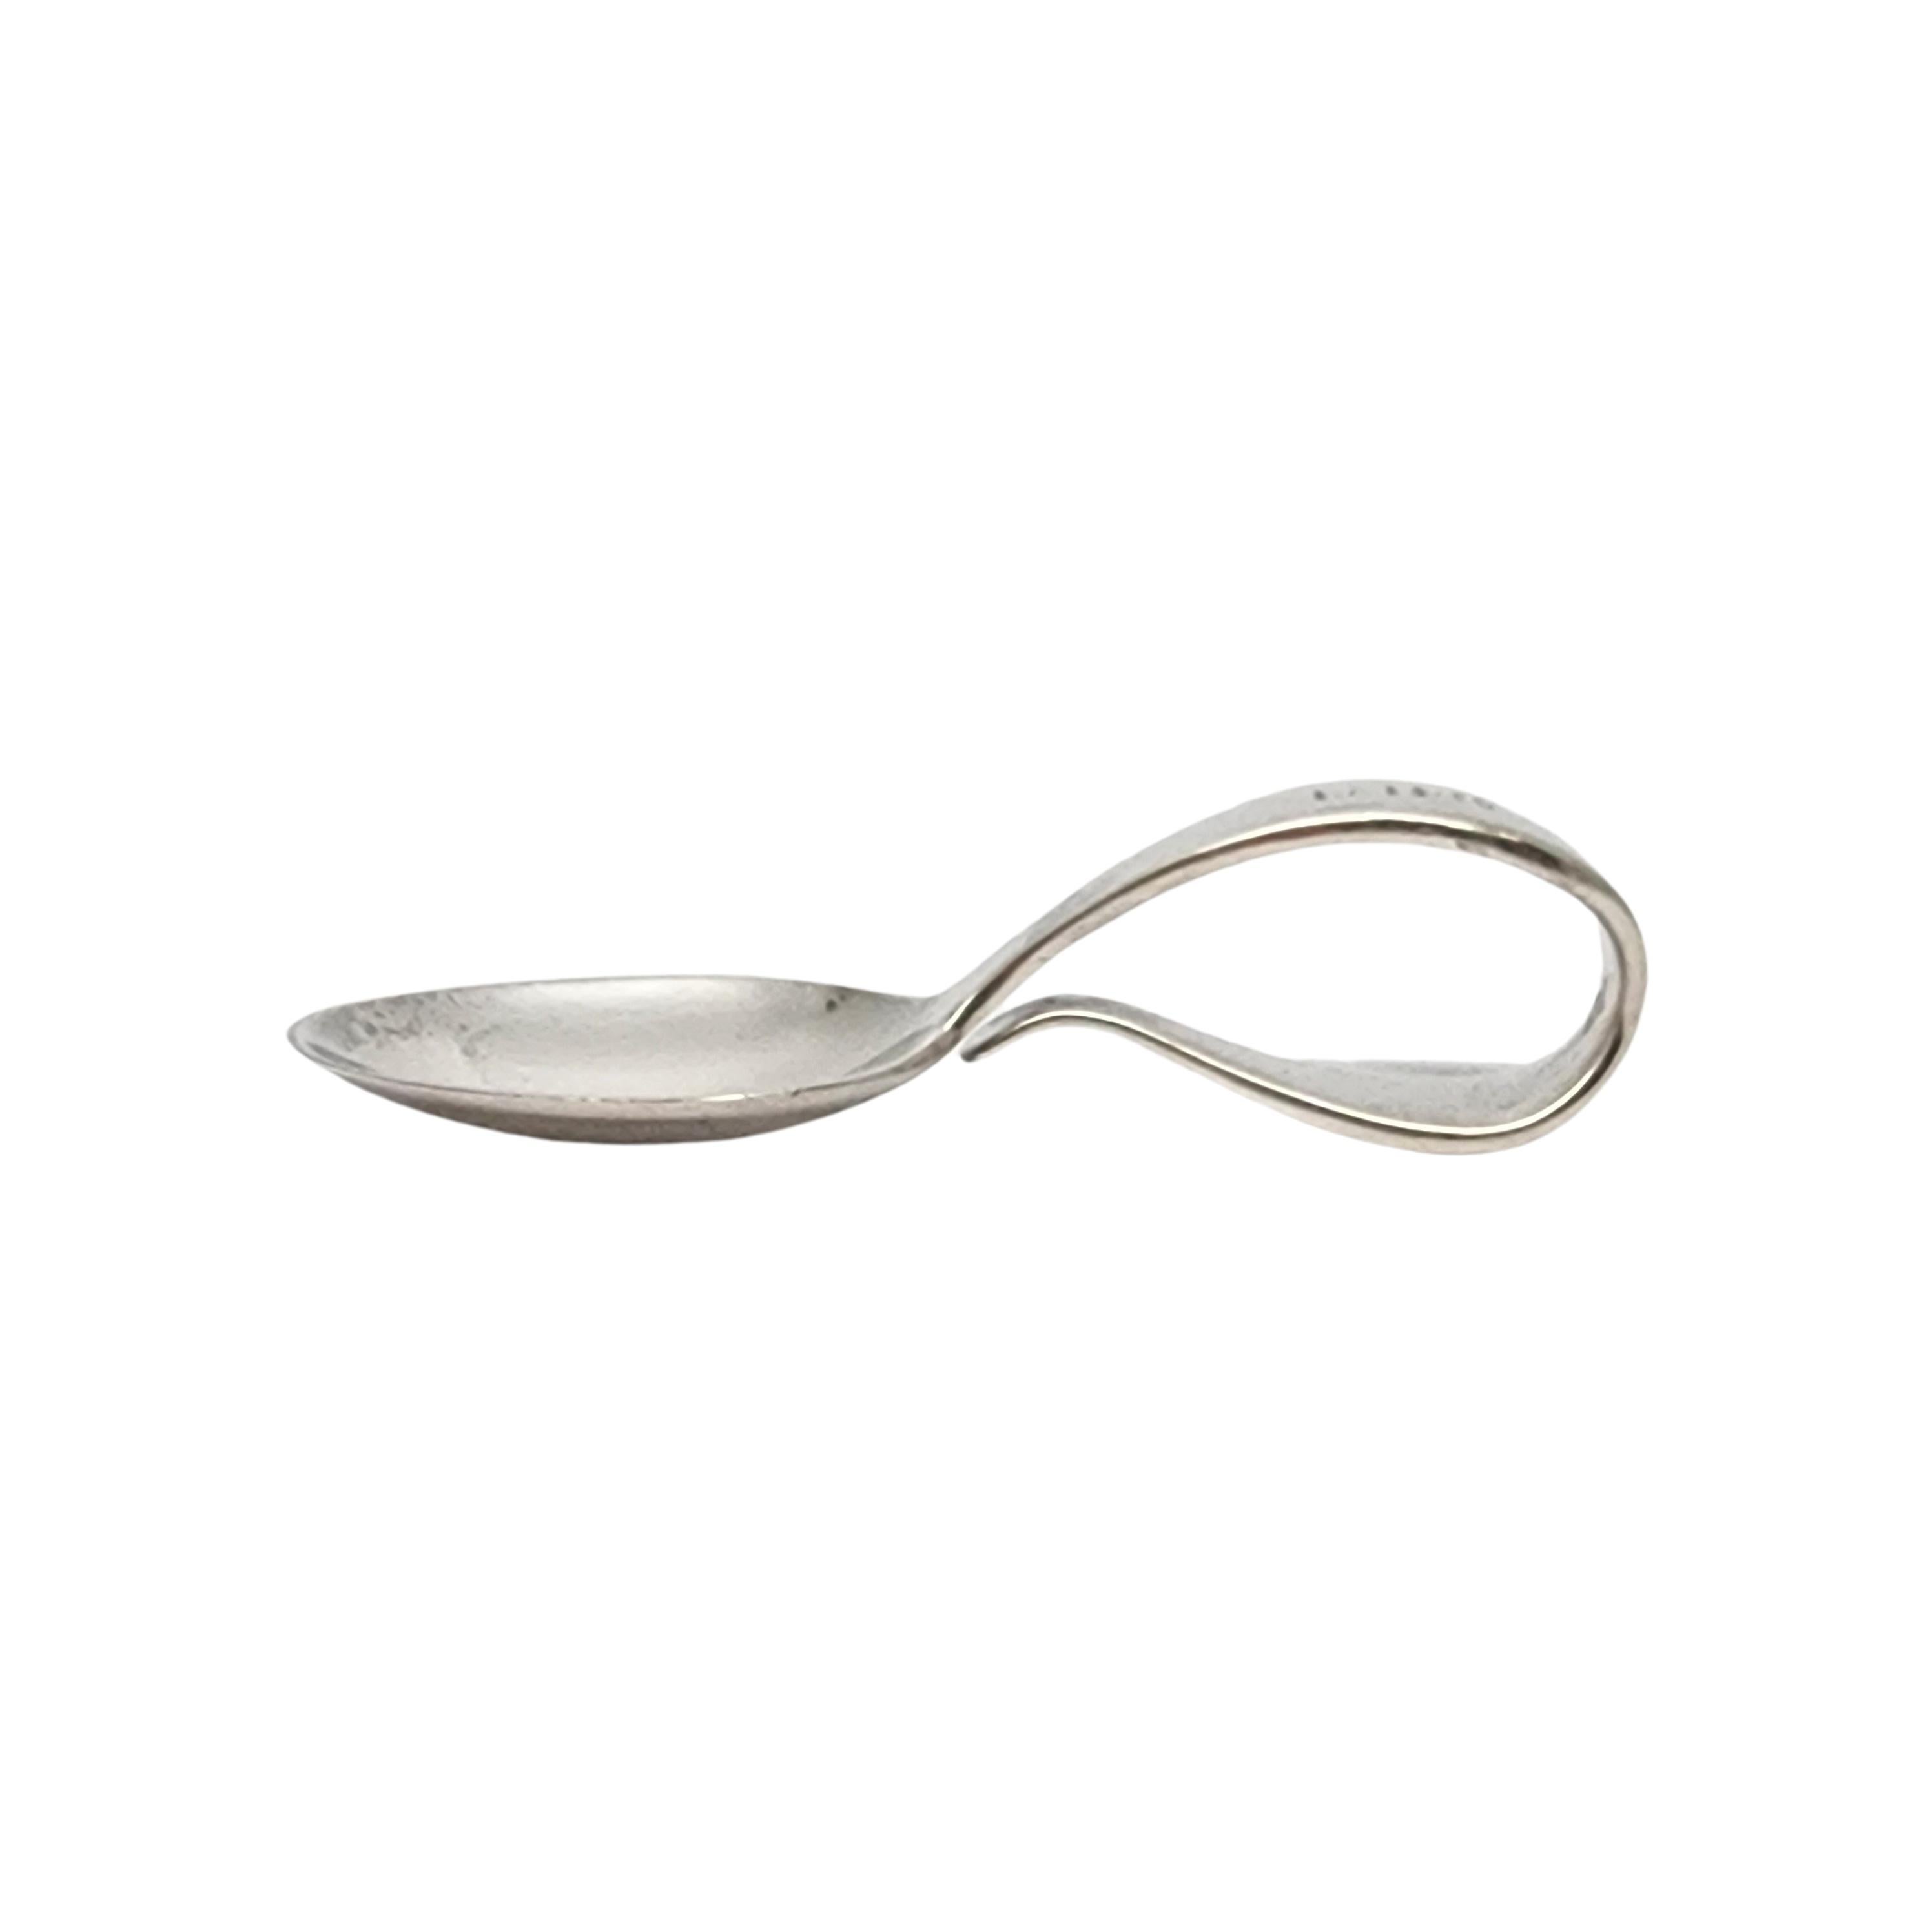 Tiffany & Co Sterling Silver Curved Loop Handle Baby Spoon w/Monogram #17262 For Sale 2